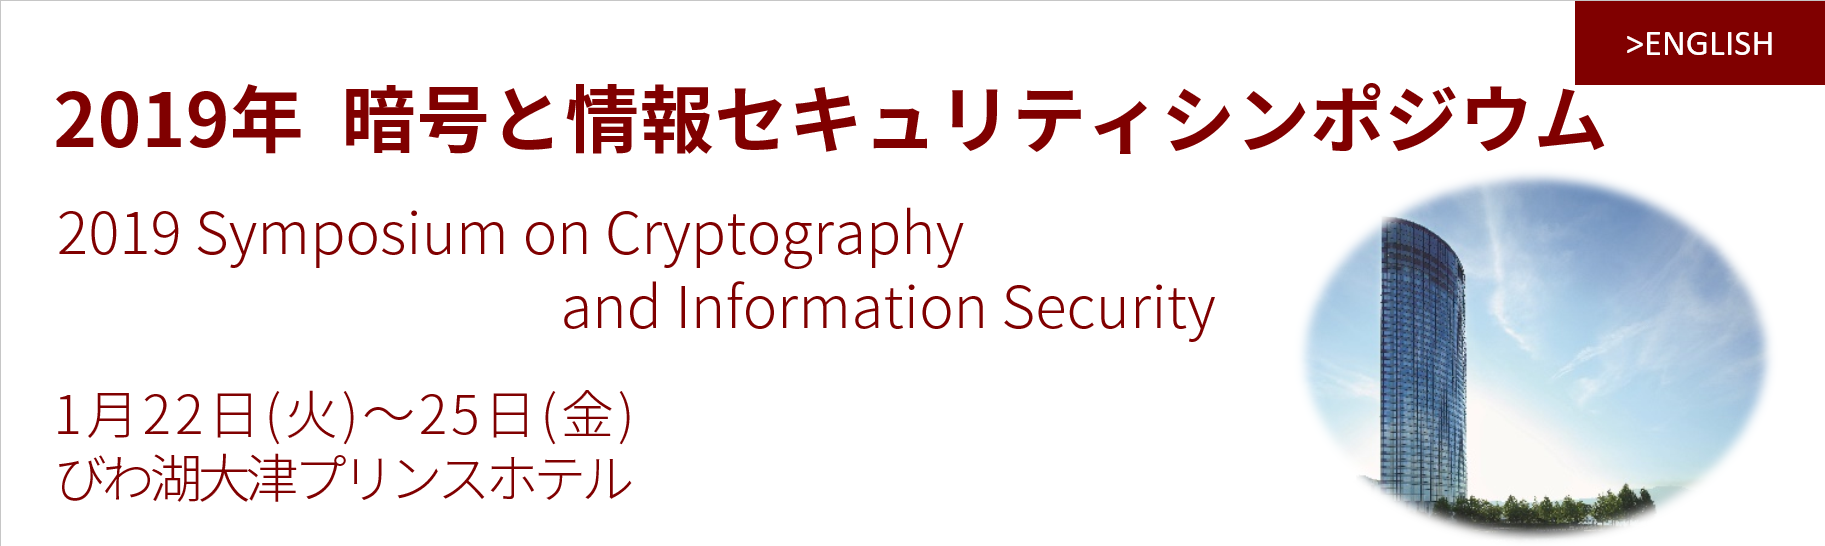 SCIS2019　2019 Symposium on Cryptography and Information Security